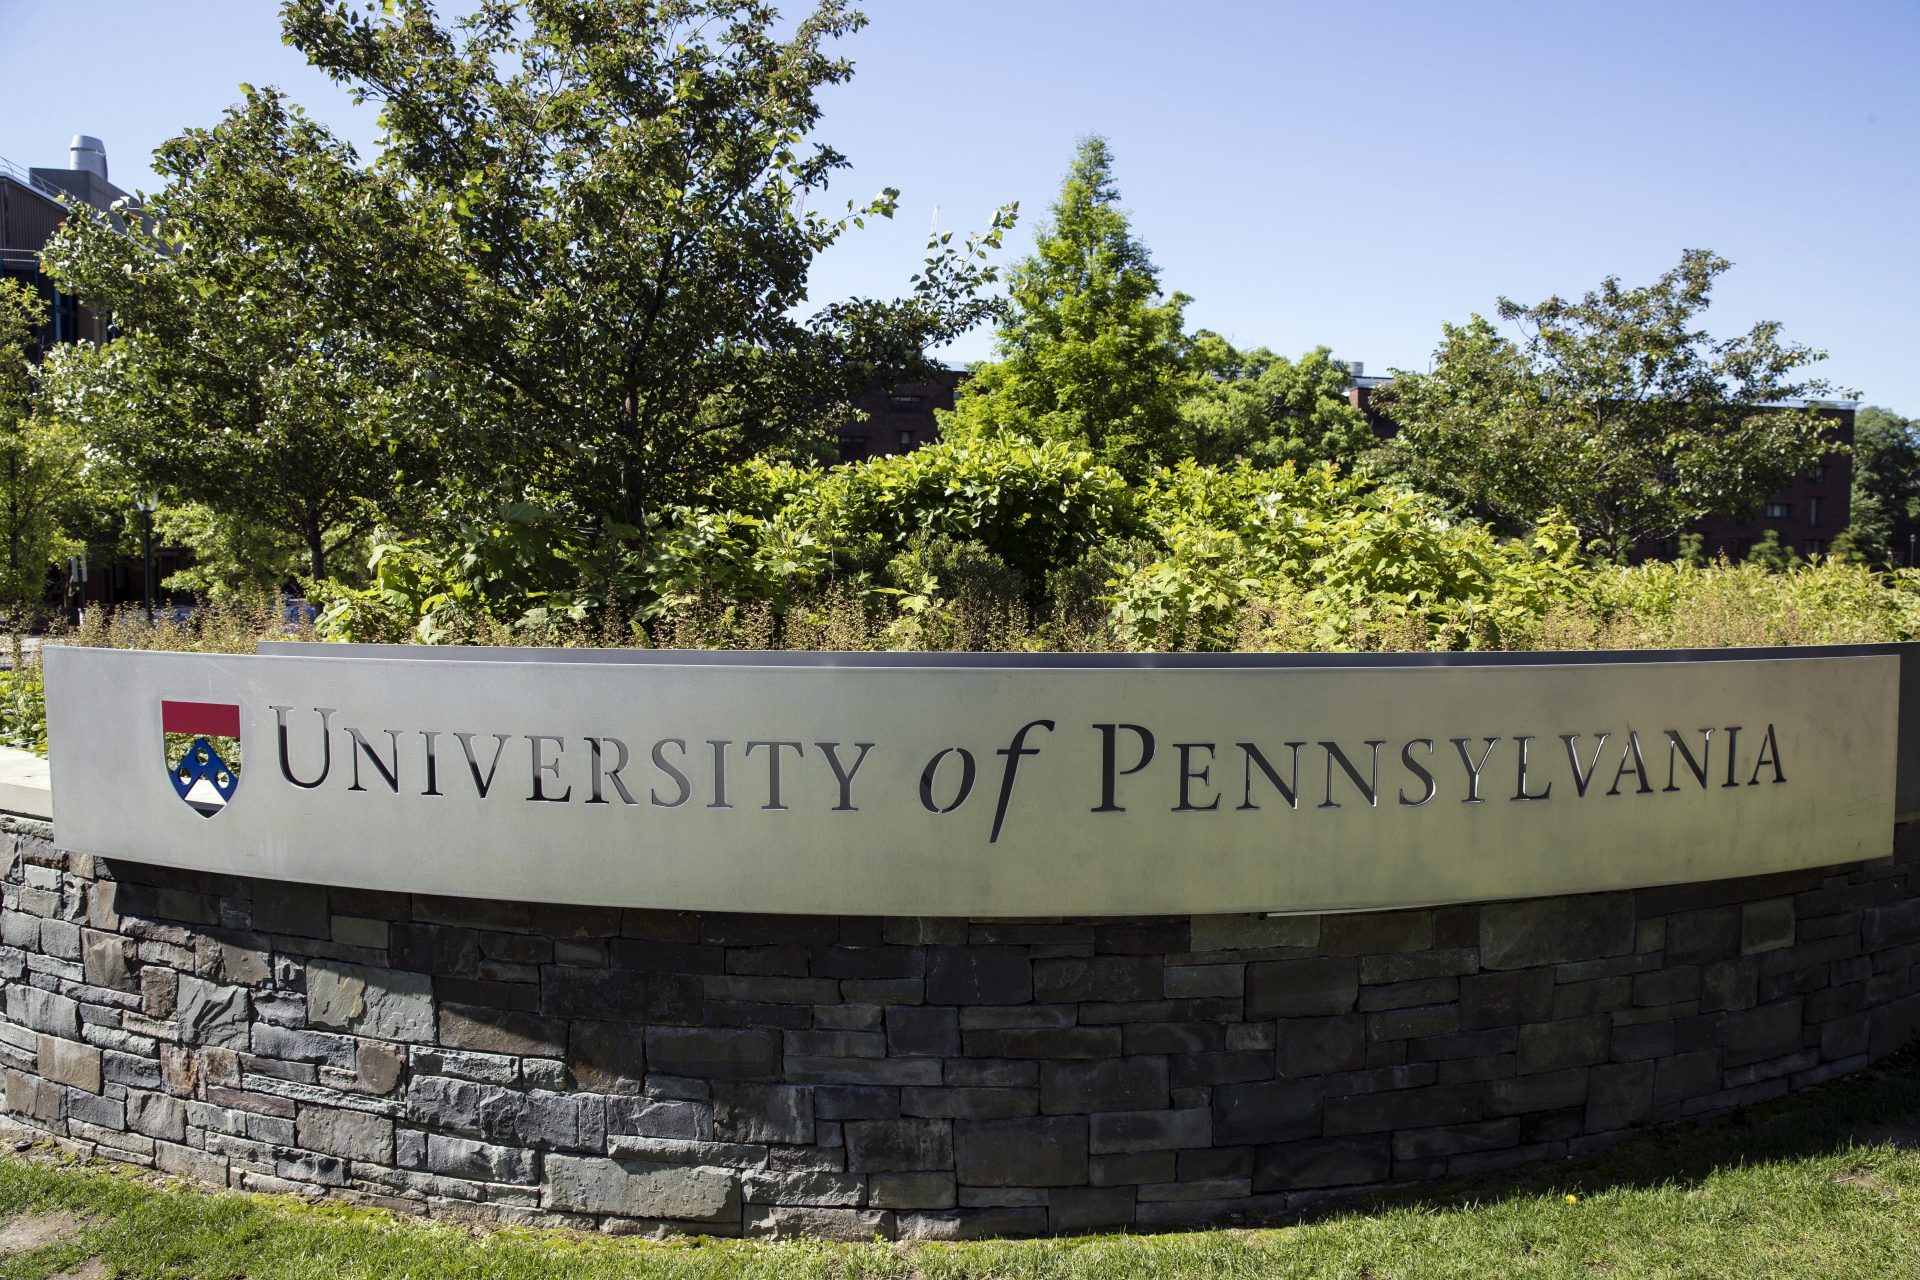 The University of Pennsylvania sign is shown in Philadelphia, May 15, 2019. At Cornell and the University of Pennsylvania, officials have banned indoor social events as COVID infections spread.